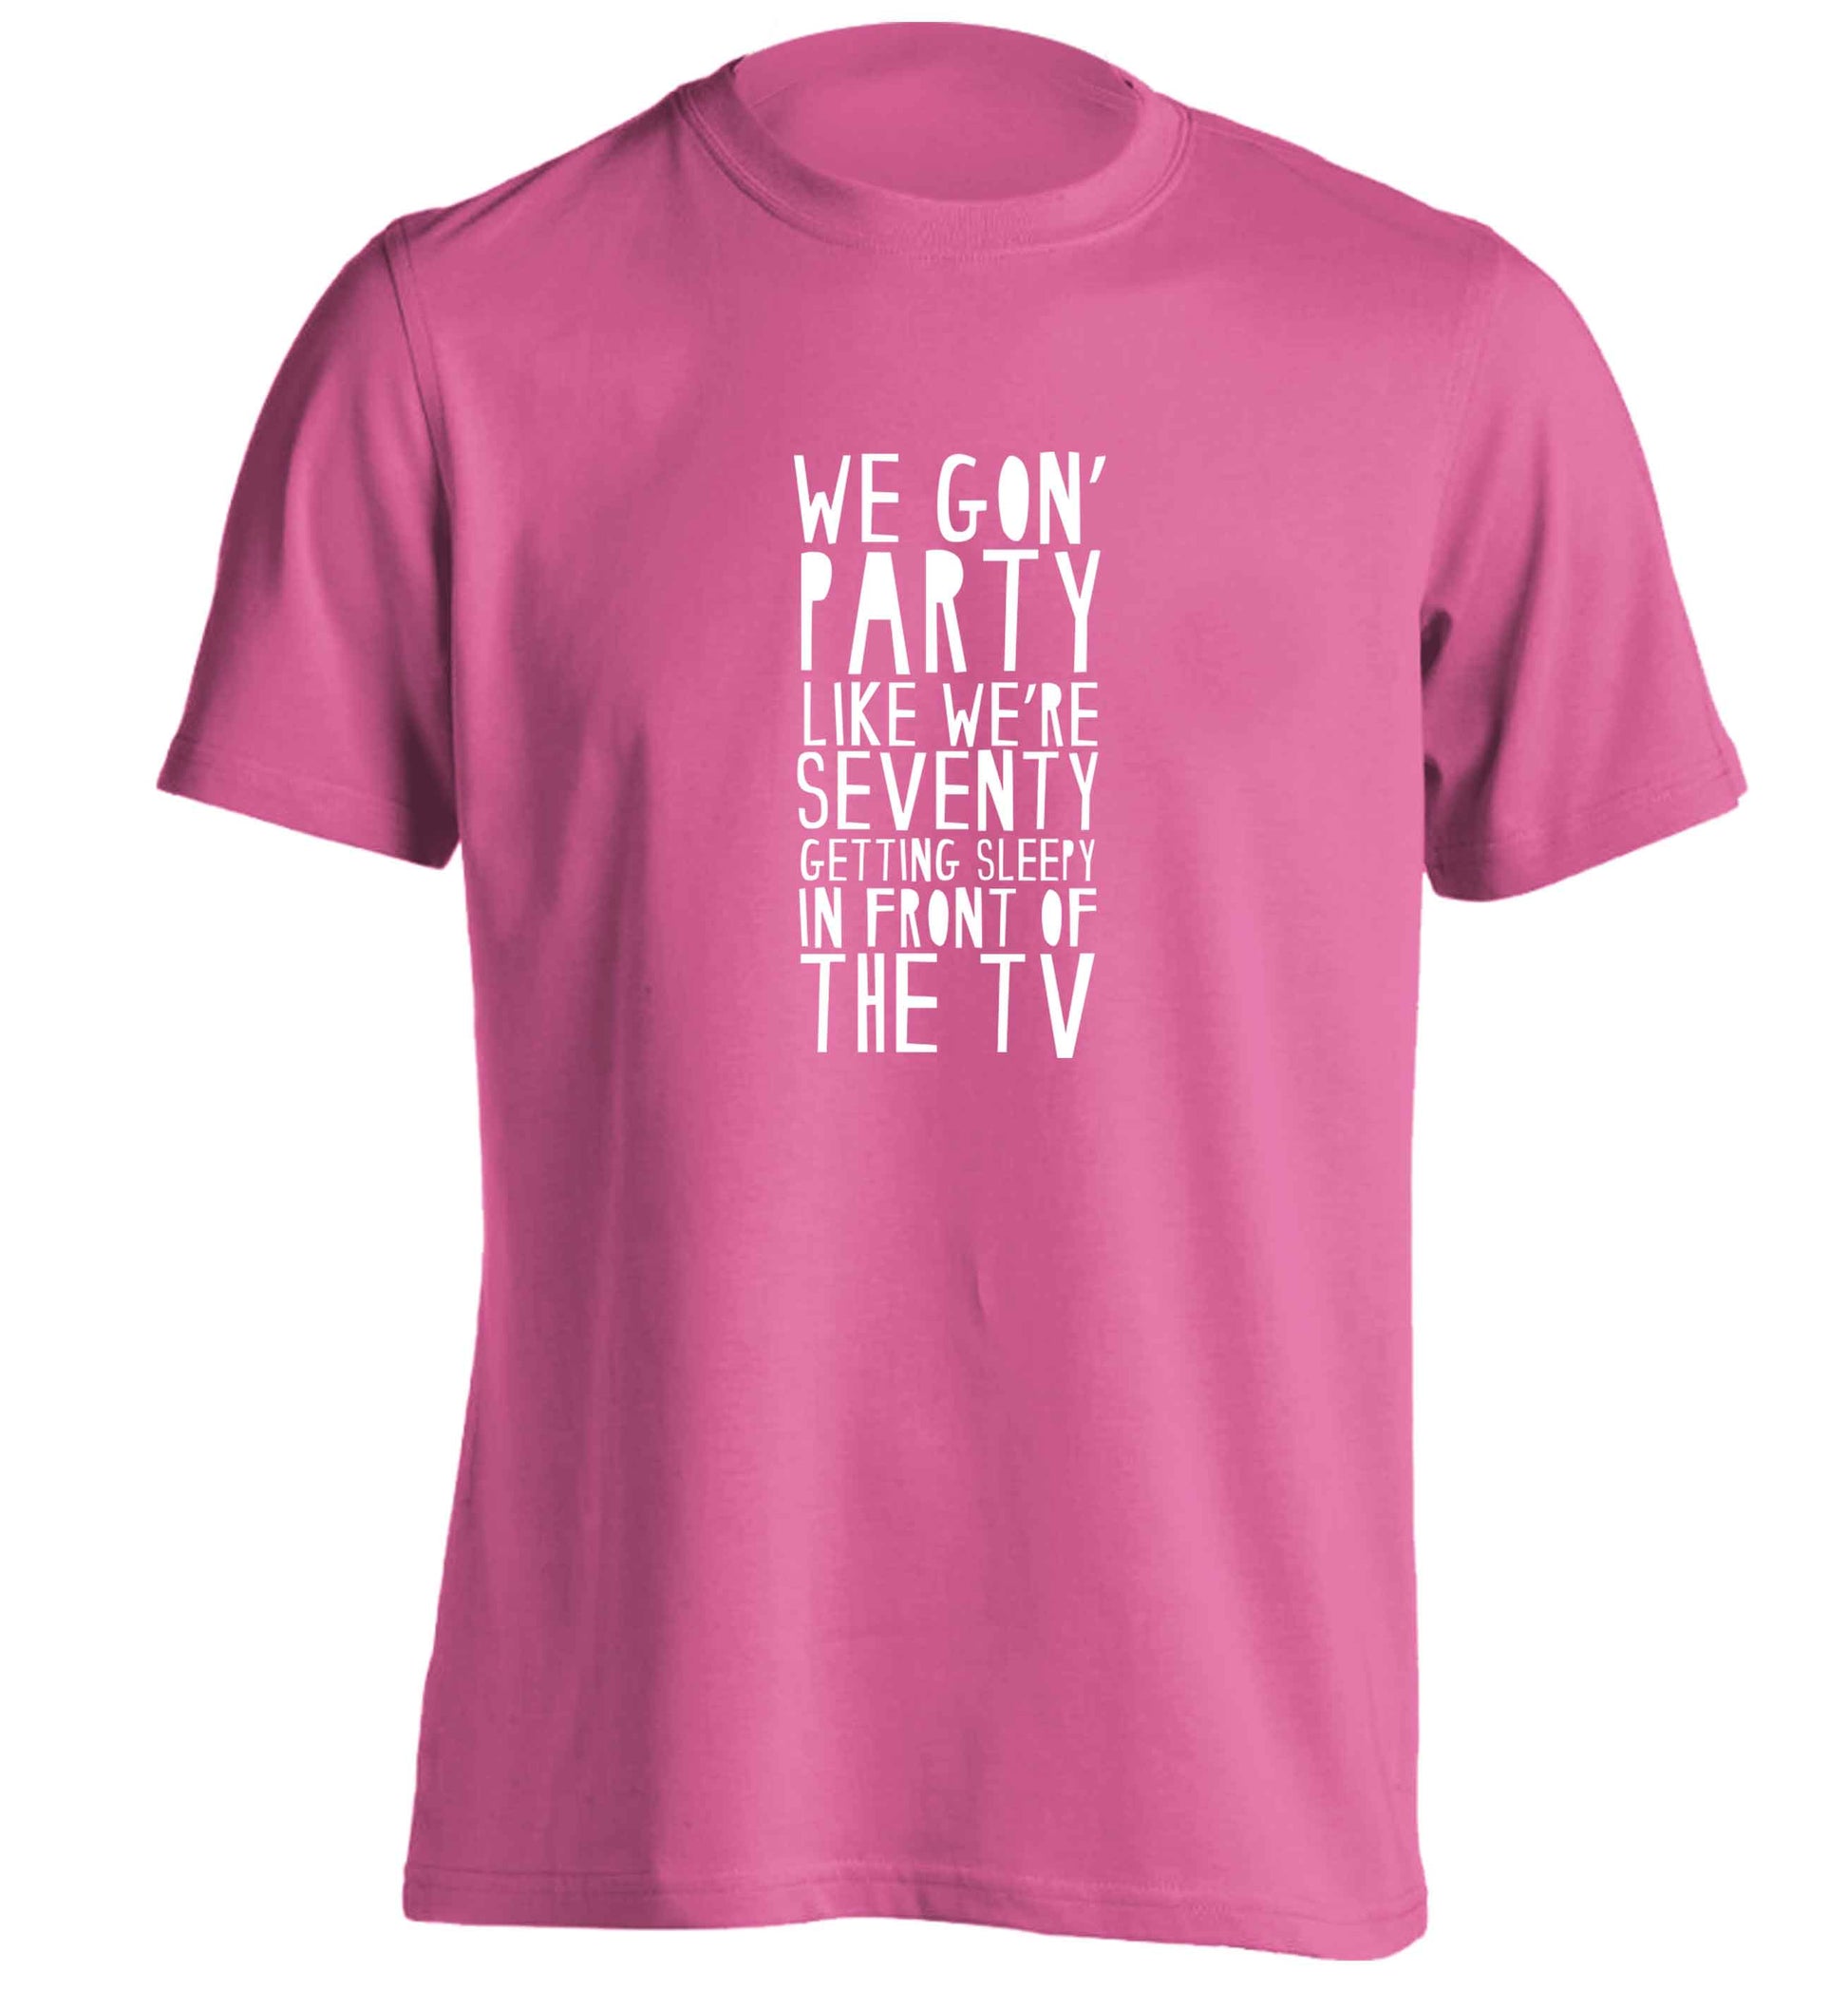 We gon' party like we're seventy getting sleepy in front of the TV adults unisex pink Tshirt 2XL